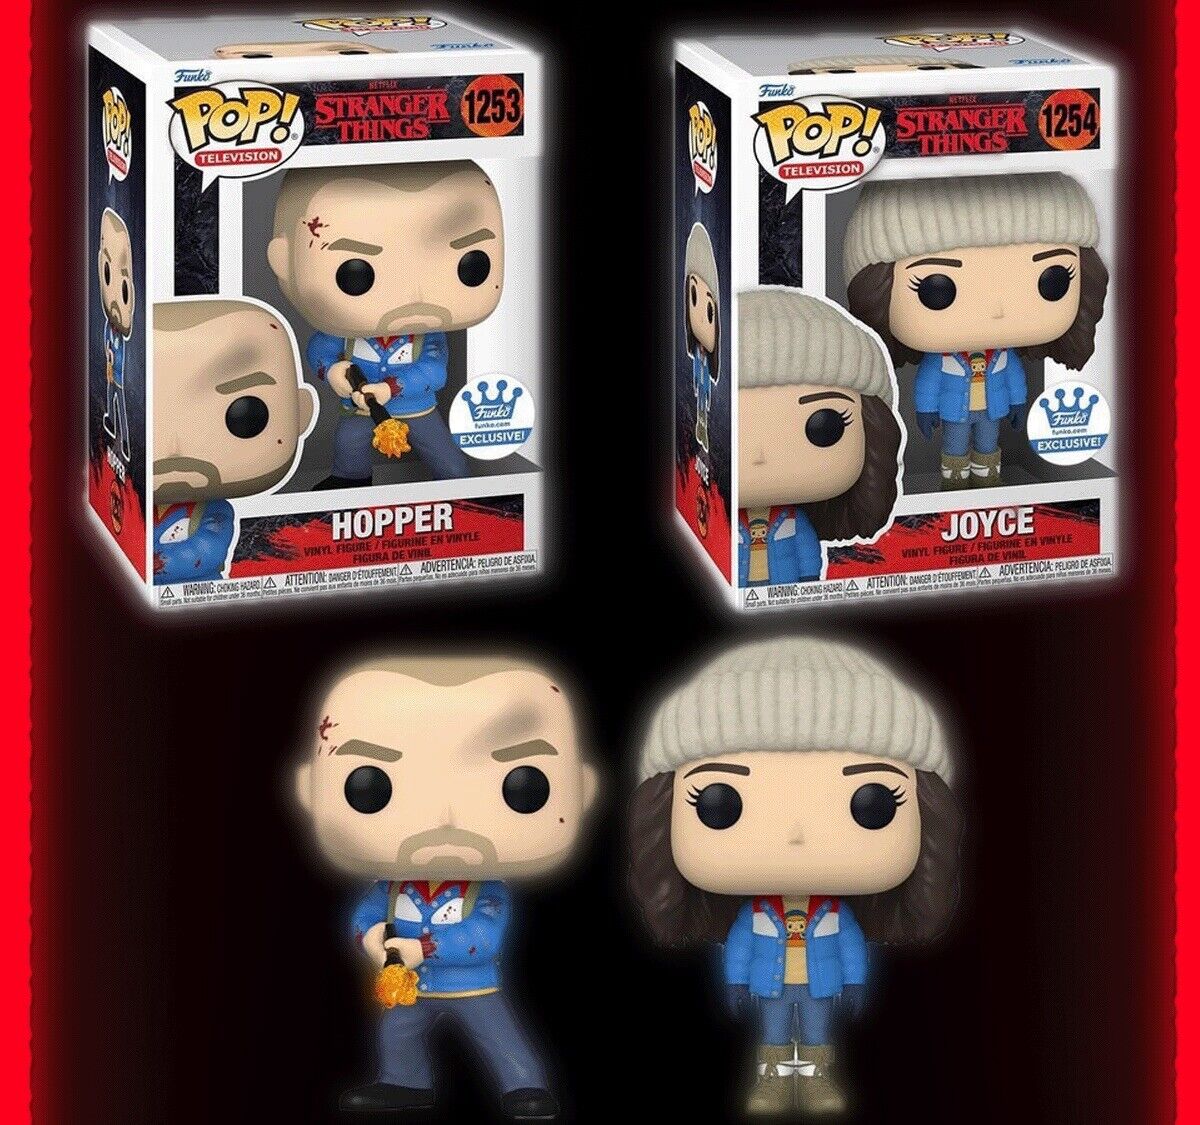 NEW - Funko Pop Hopper and Joyce Stranger Things - Two Pack - FAST SHIP - Mint